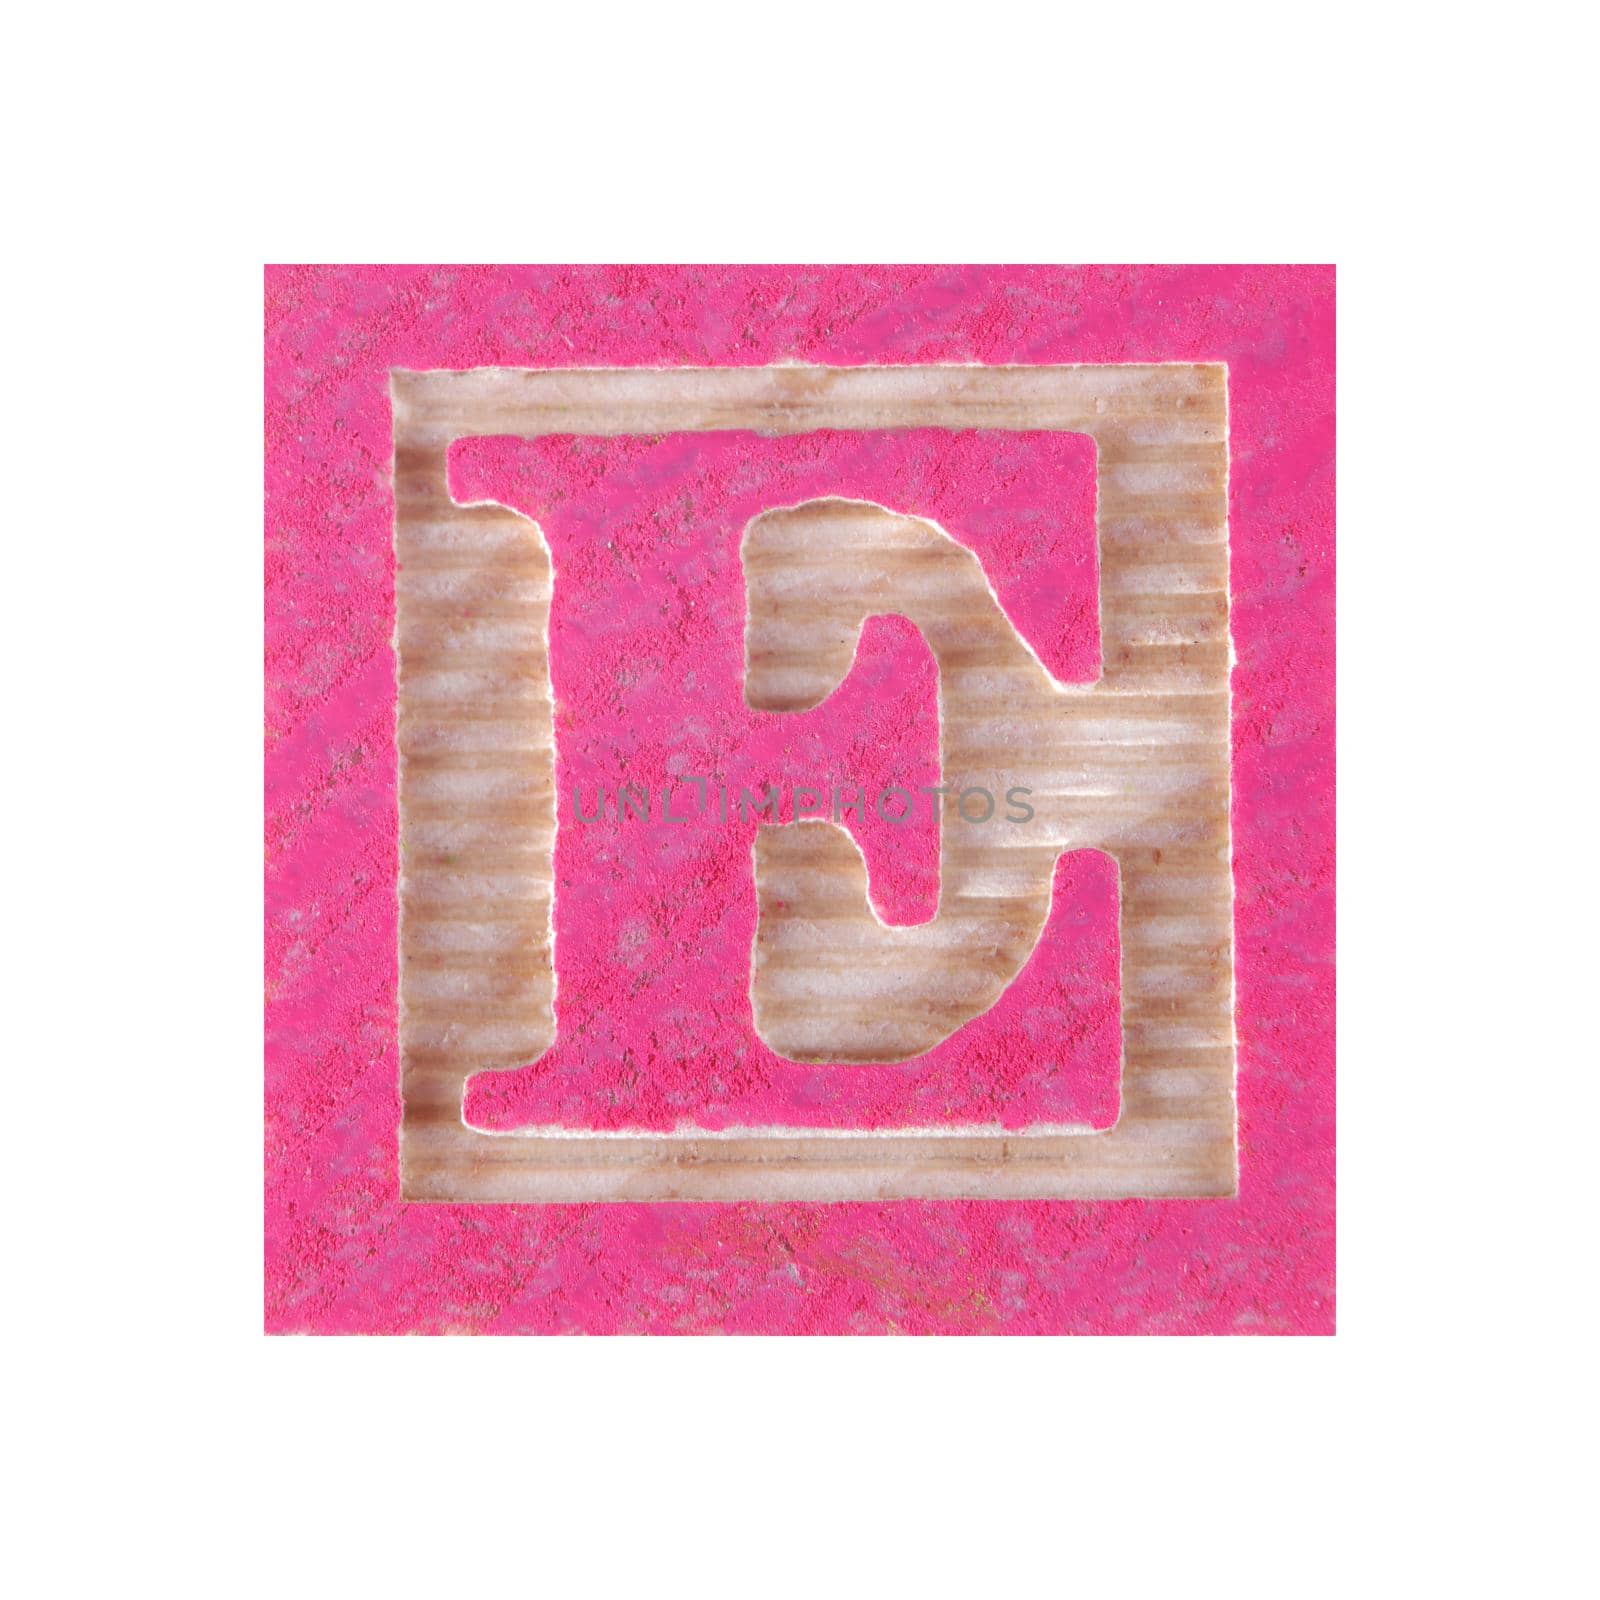 Letter E childs wooden block on white with clipping path
